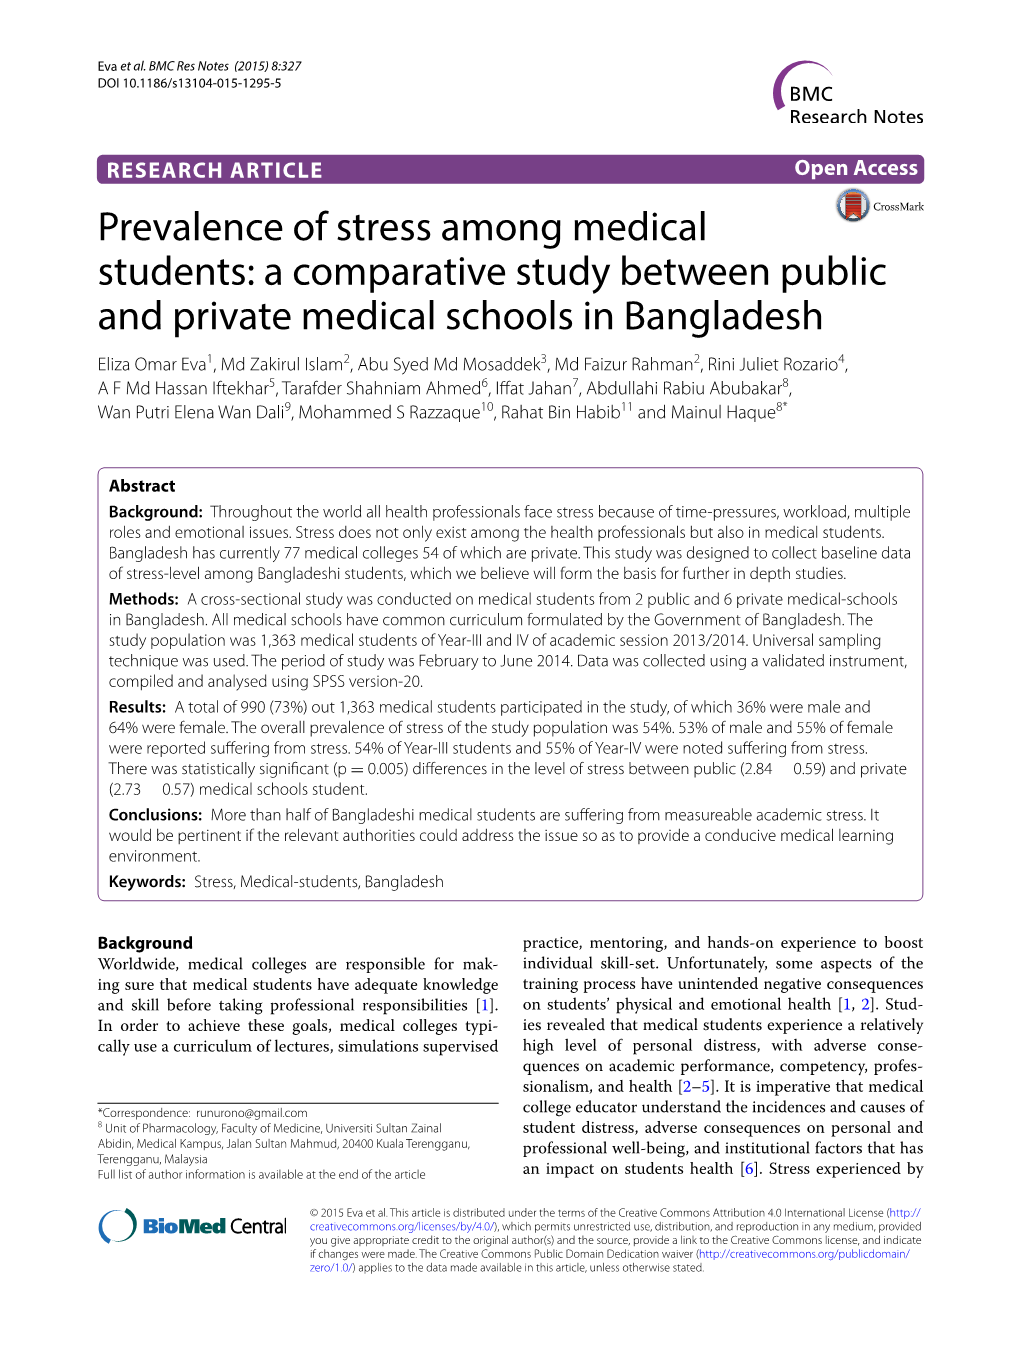 Prevalence of Stress Among Medical Students